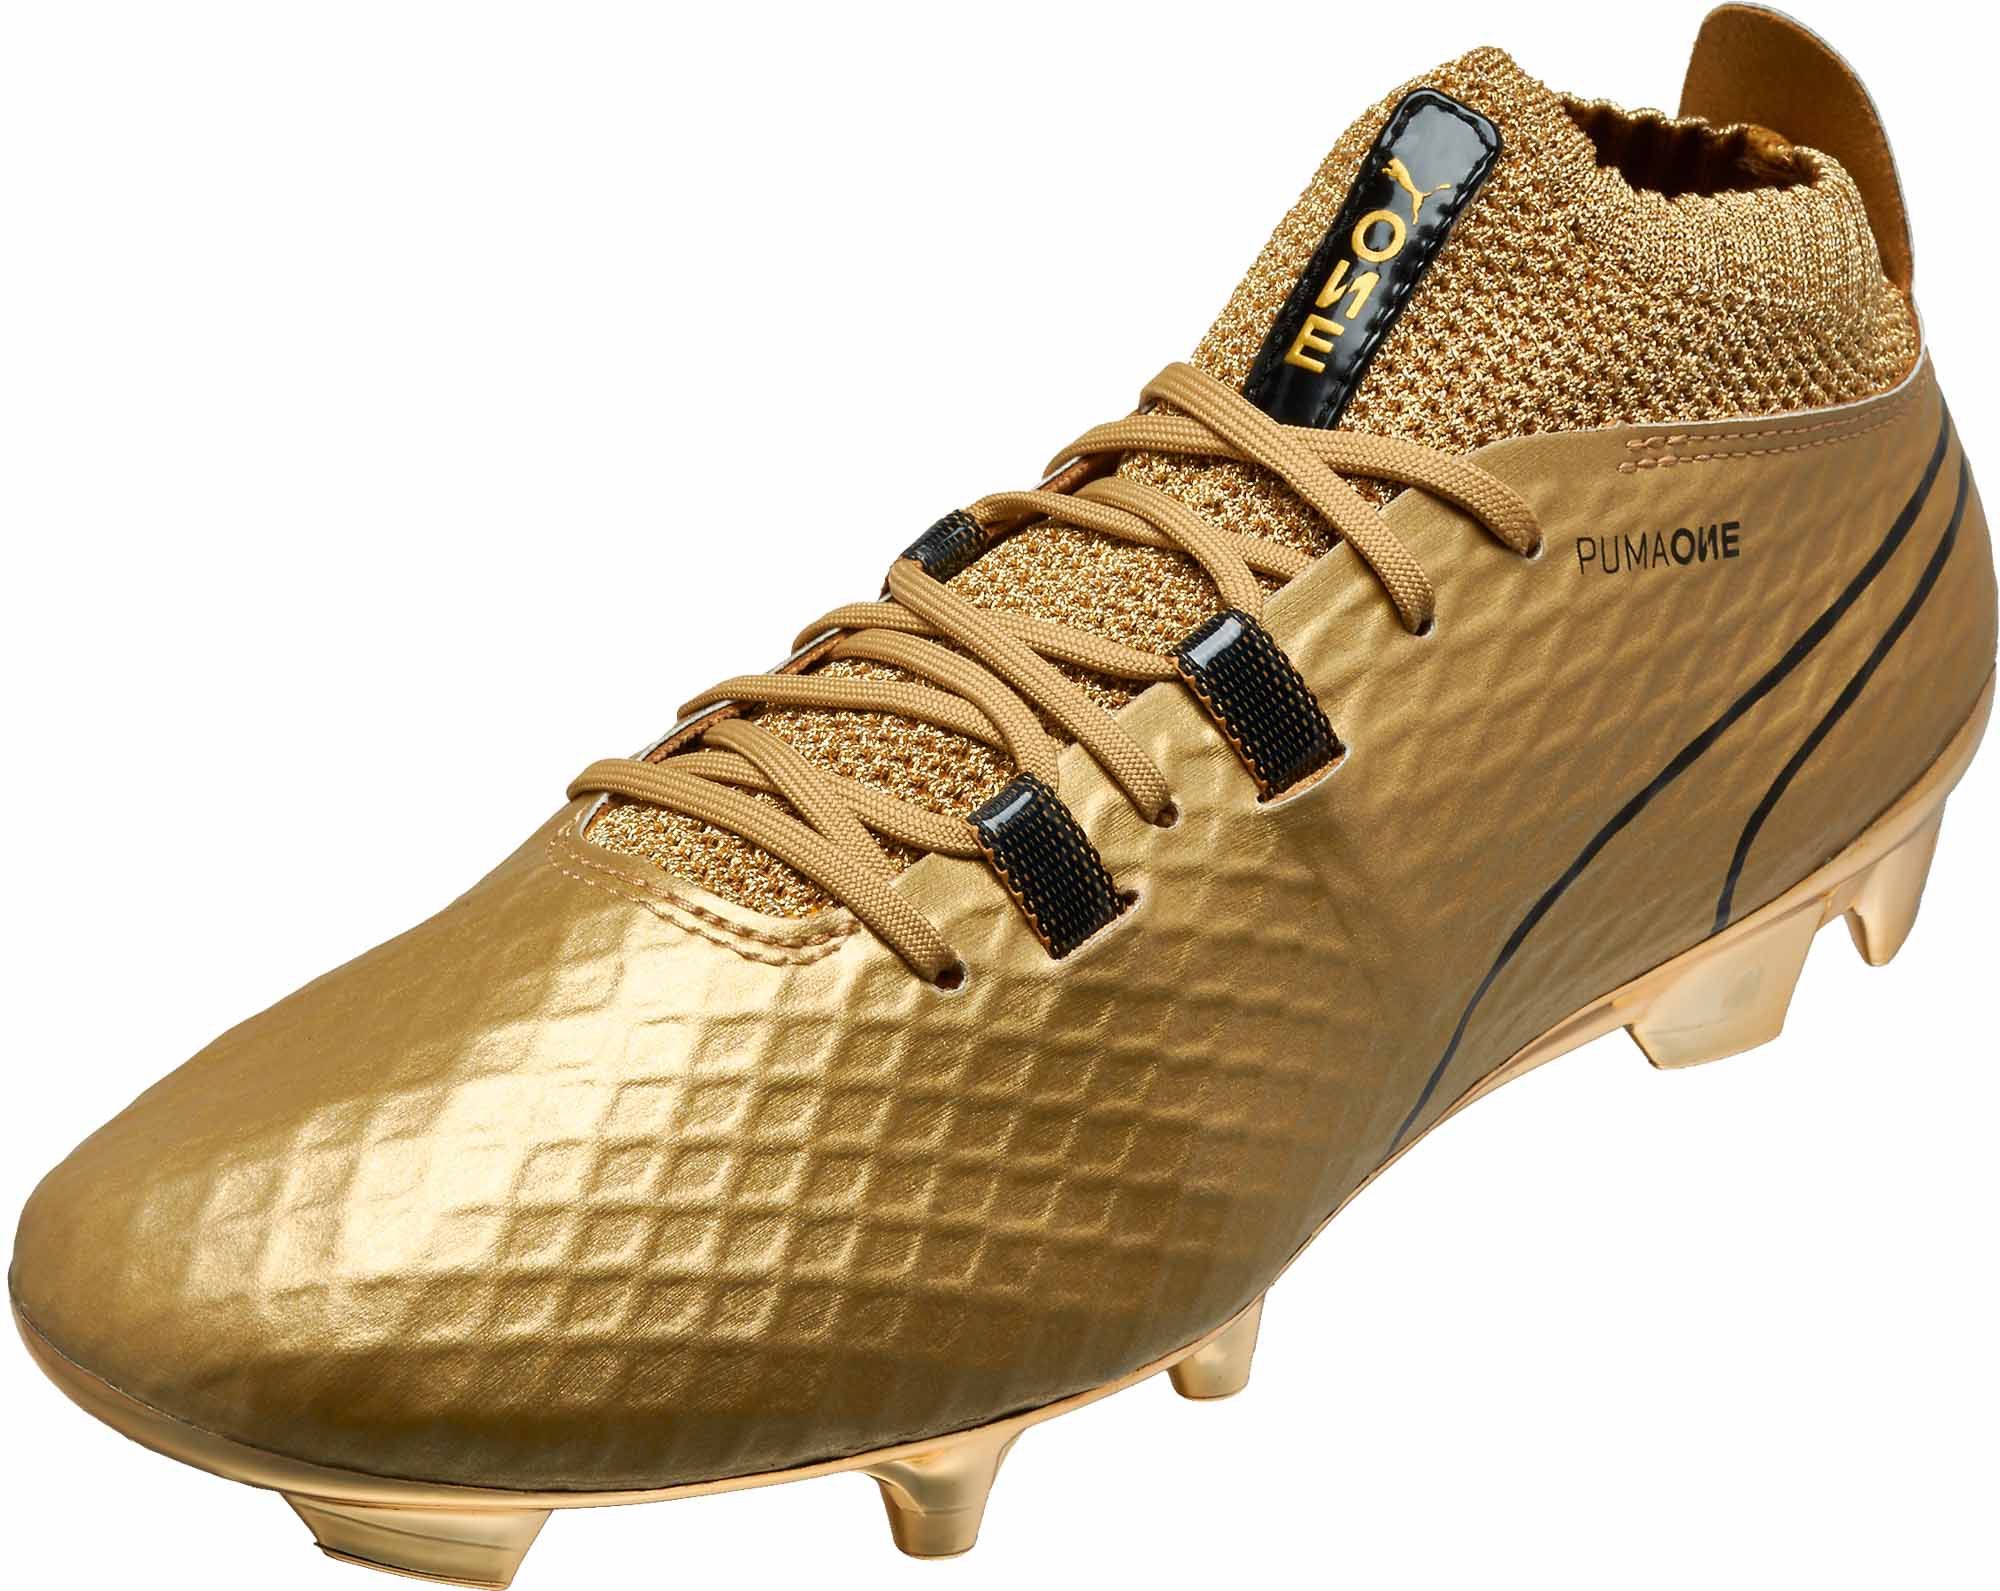 Pickering capture Existence Puma One FG - Gold Puma Soccer Cleats